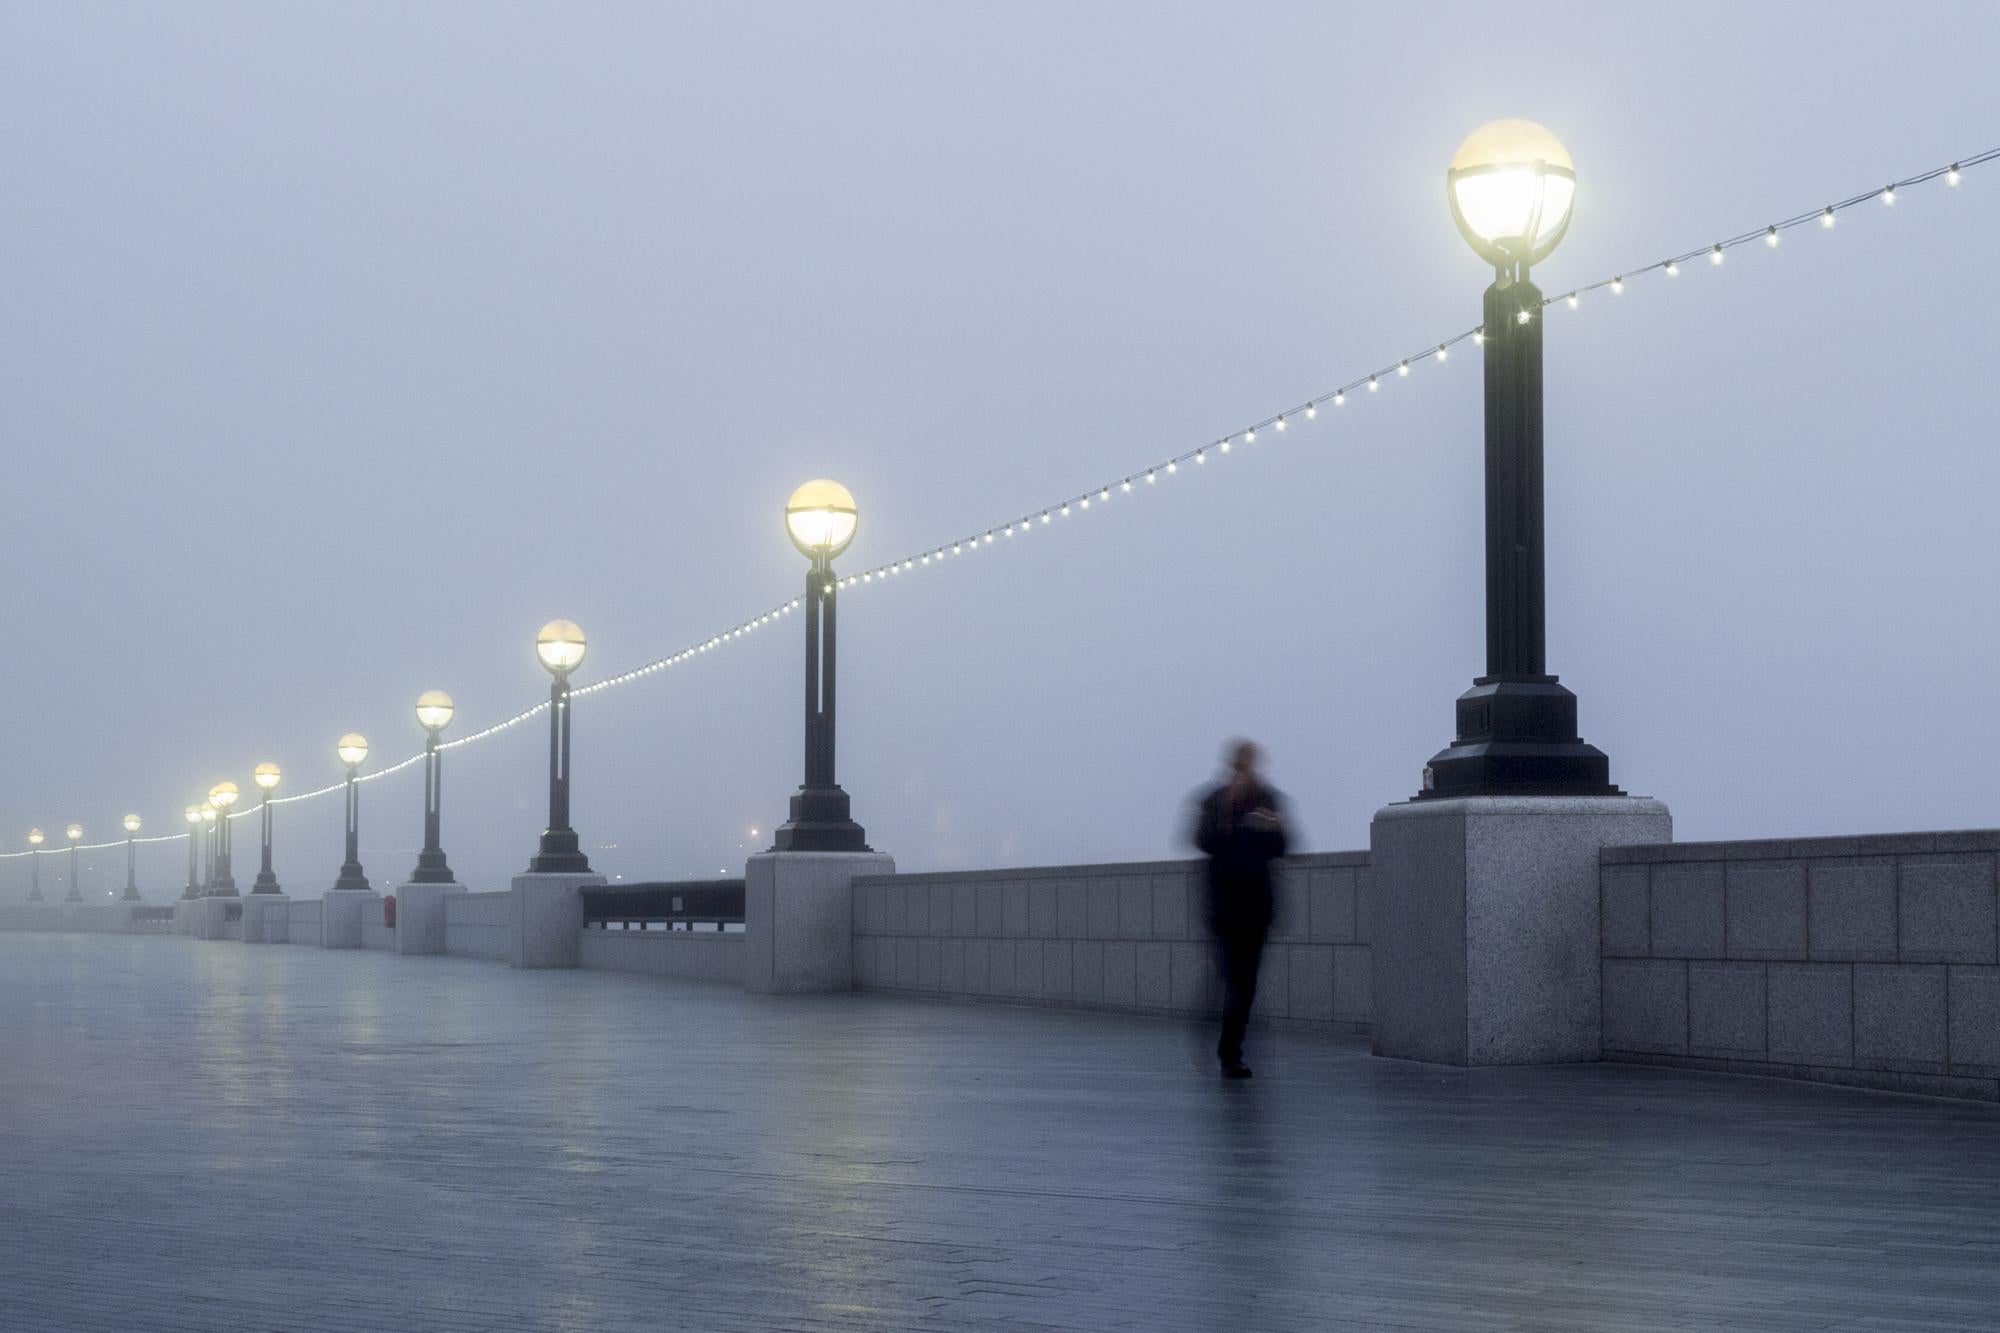 There’s no bridge too far: many of his photographs are taken at dawn before people go to work